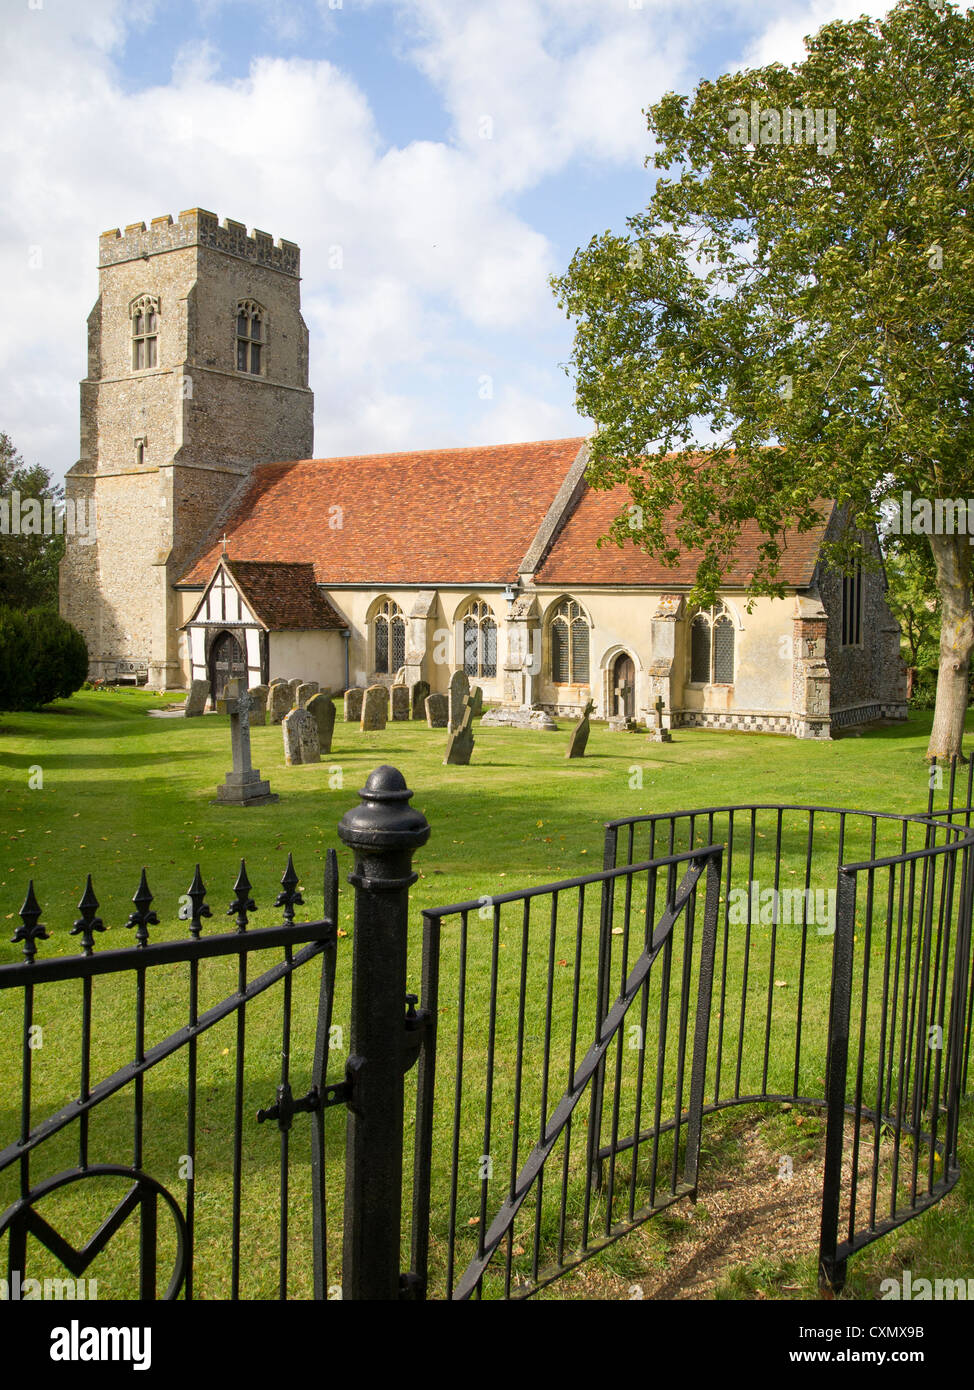 An old English church pictured with a wrought iron kissing gate and fence in the foreground. Stock Photo